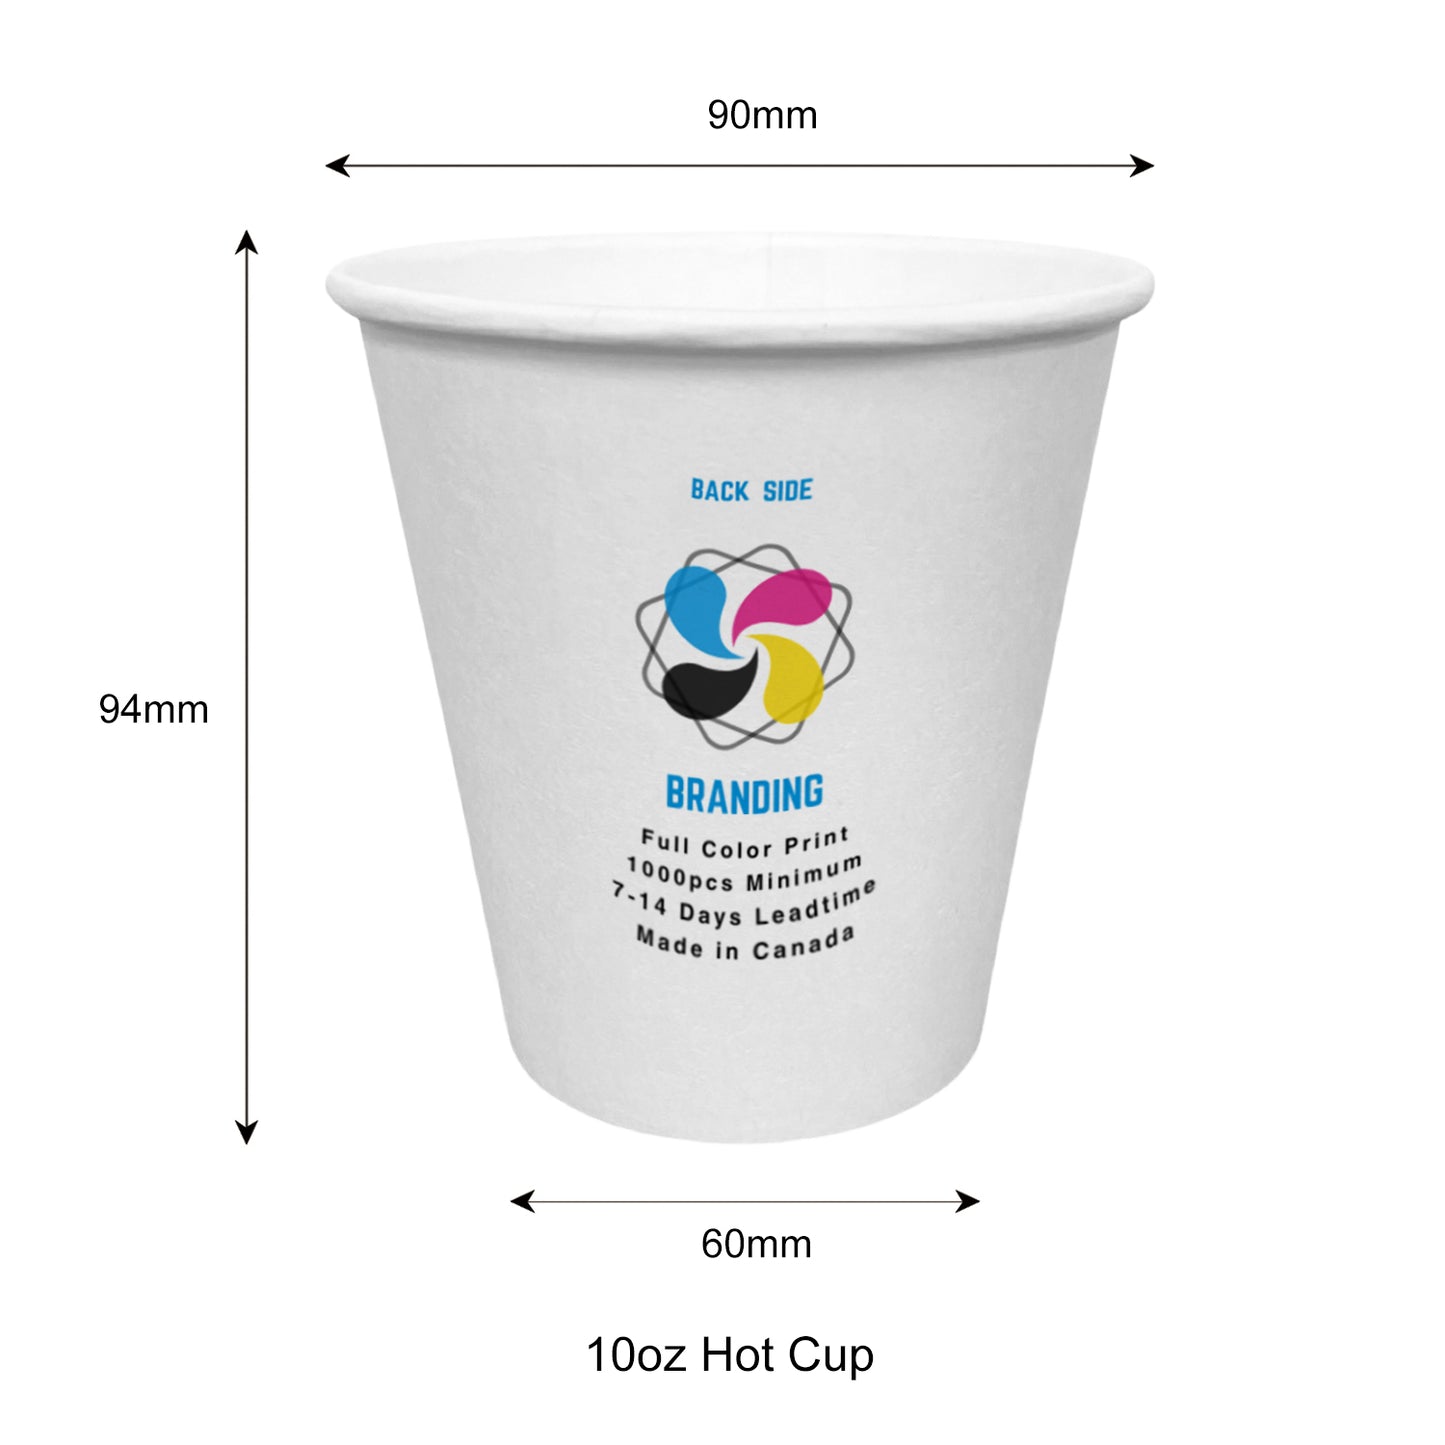 1000pcs 10oz, 296ml Single Wall White Paper Hot Cups with 90mm Opening; Full Color Custom Print, Printed in Canada